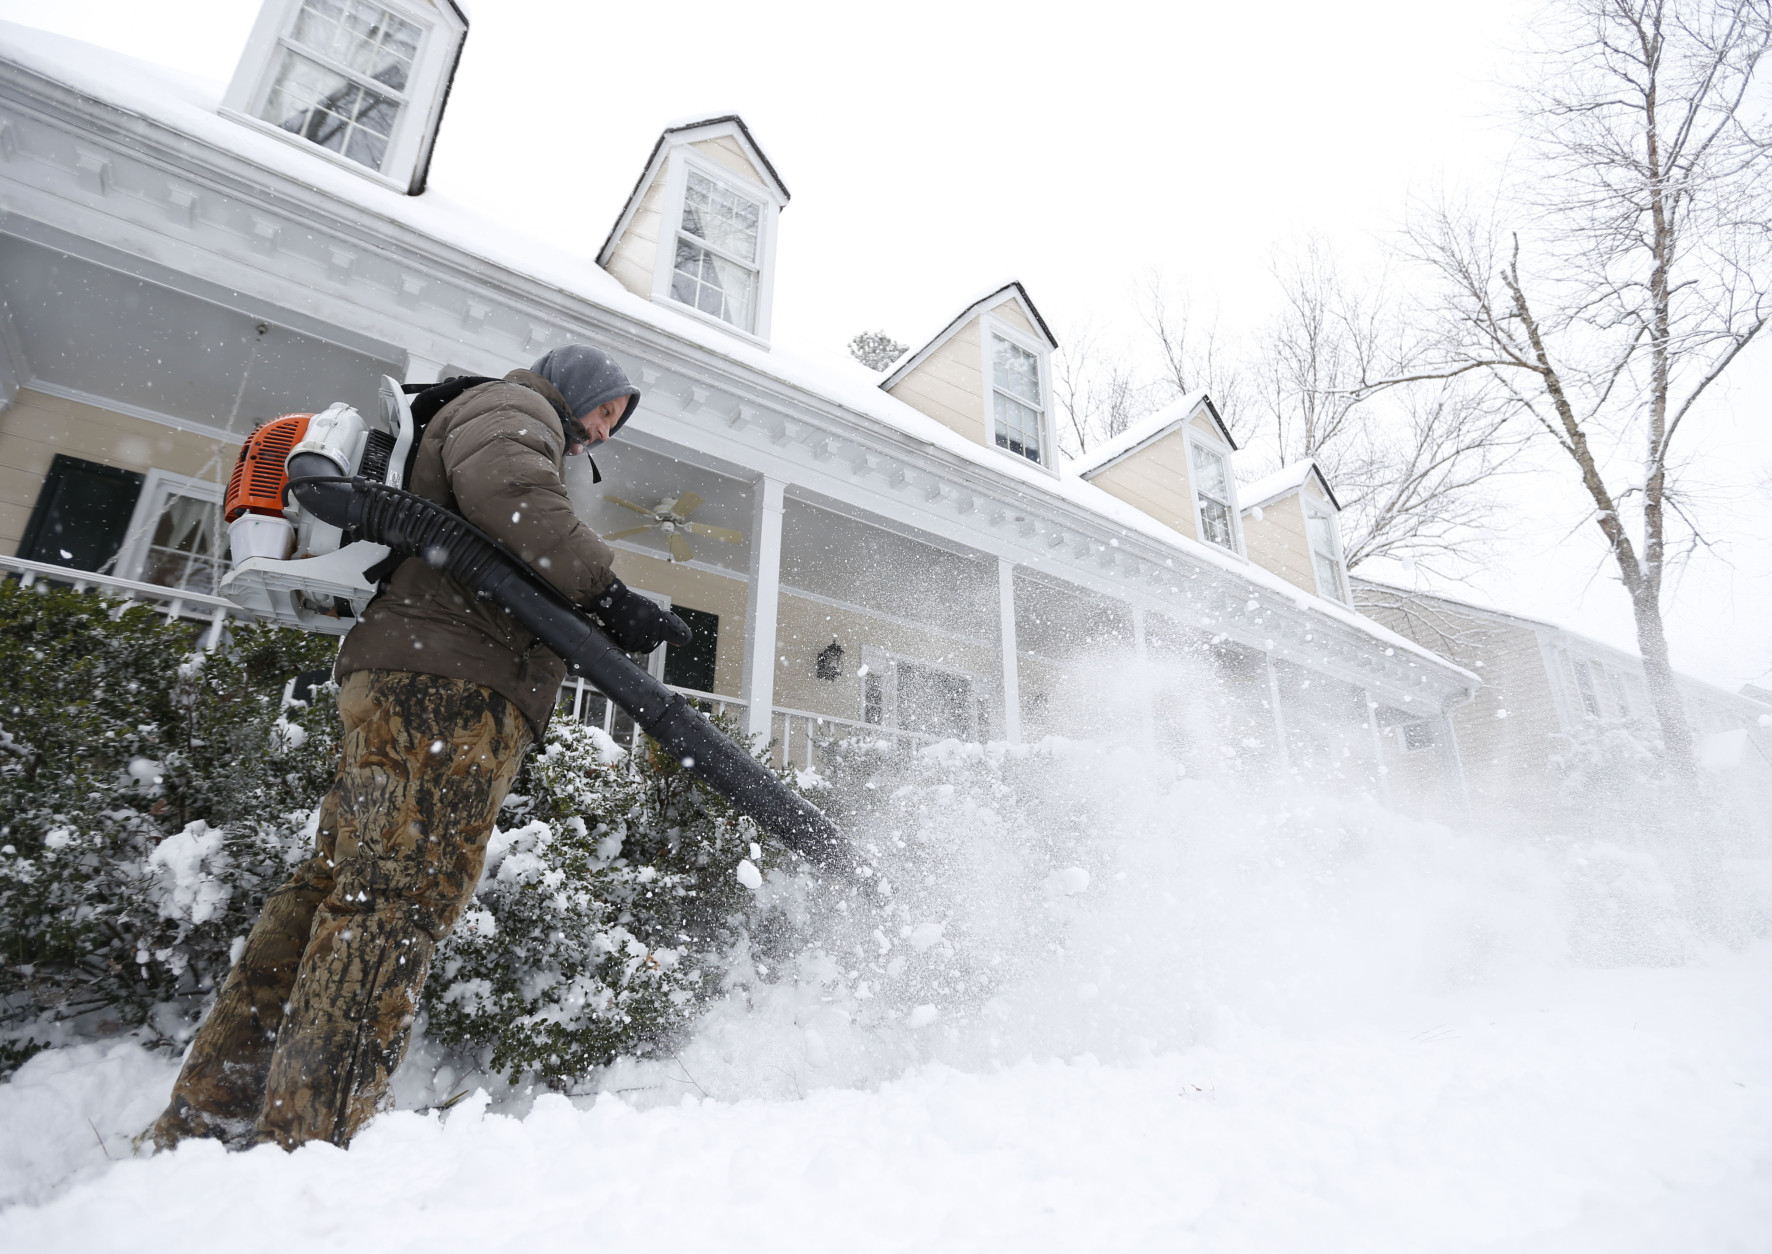 Breck Gorman of Richmond, Va., clears  the walkway in front of his home with a blower during a snowstorm in Richmond, Va., Thursday, Feb. 26, 2015. The Richmond area received about 4-6 inches of snow. (AP Photo/Steve Helber)